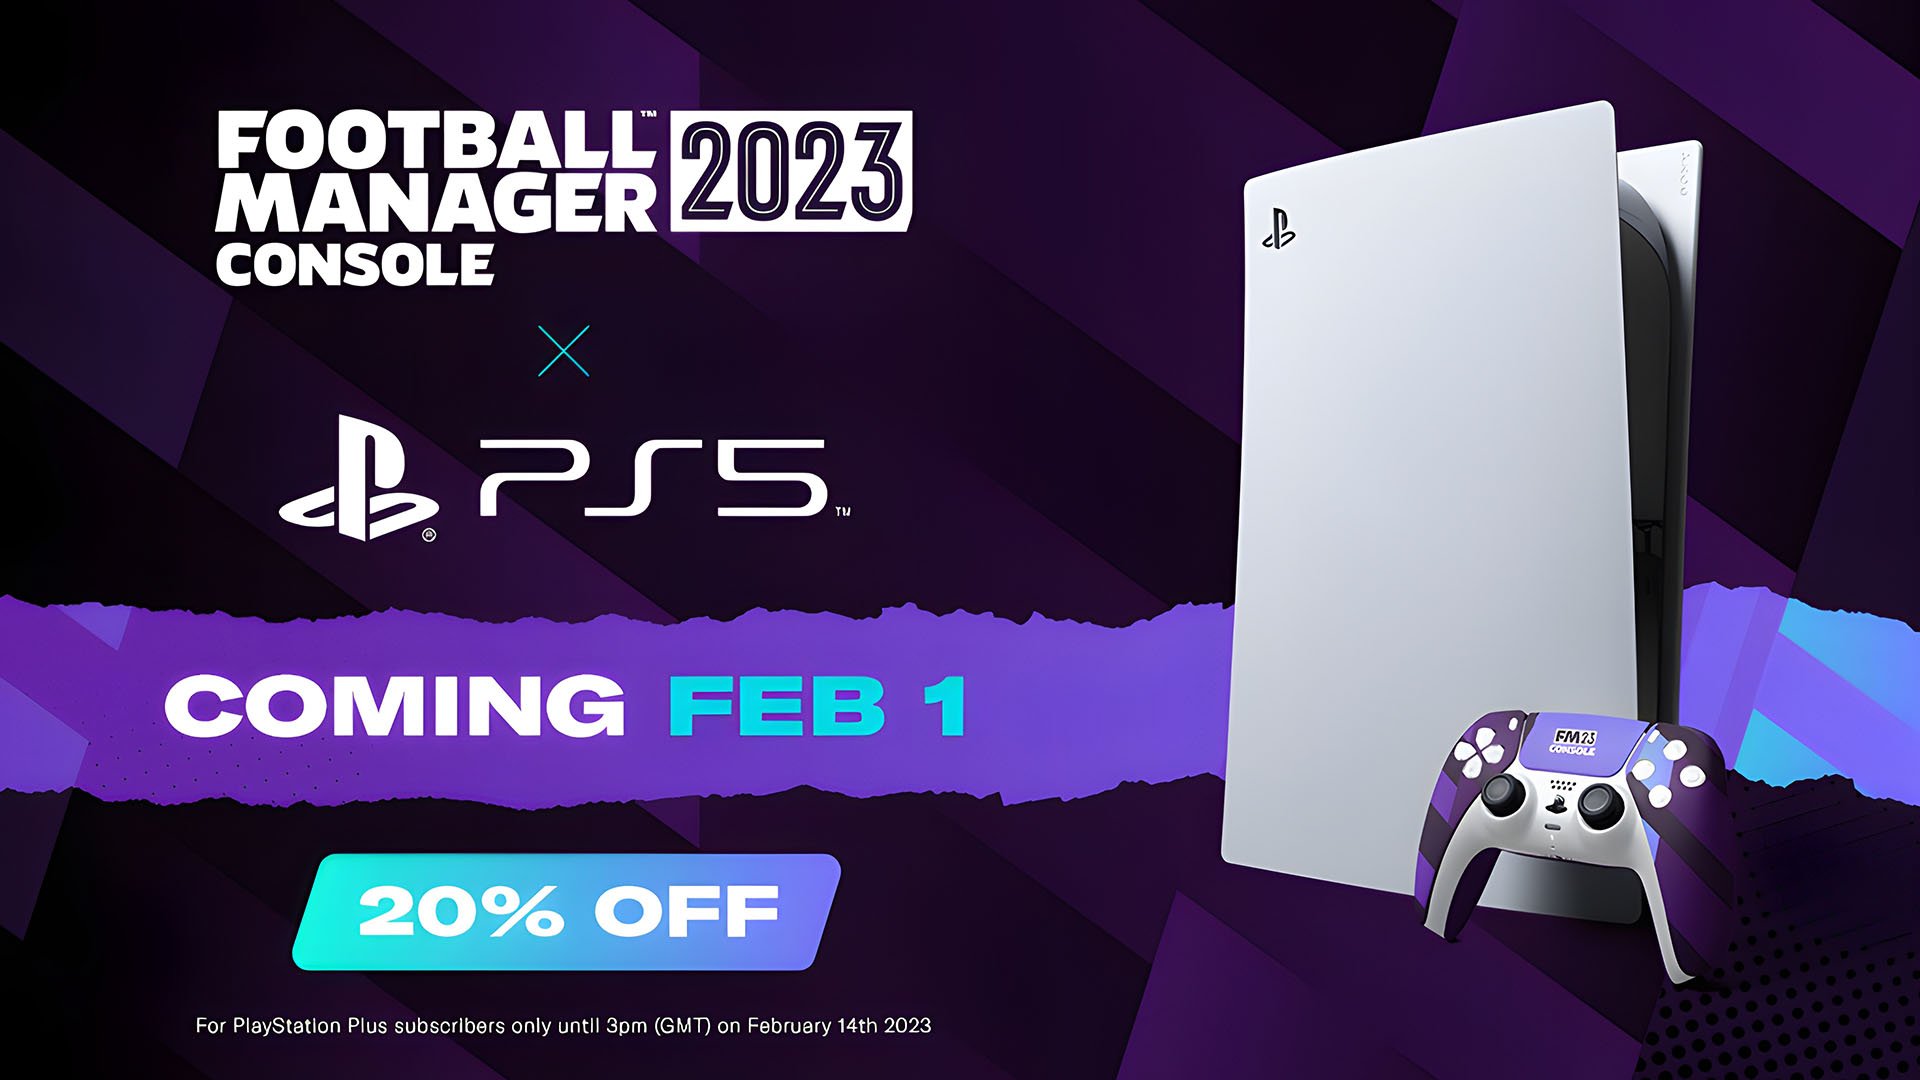 #
      Football Manager 2023 Console for PS5 launches February 1